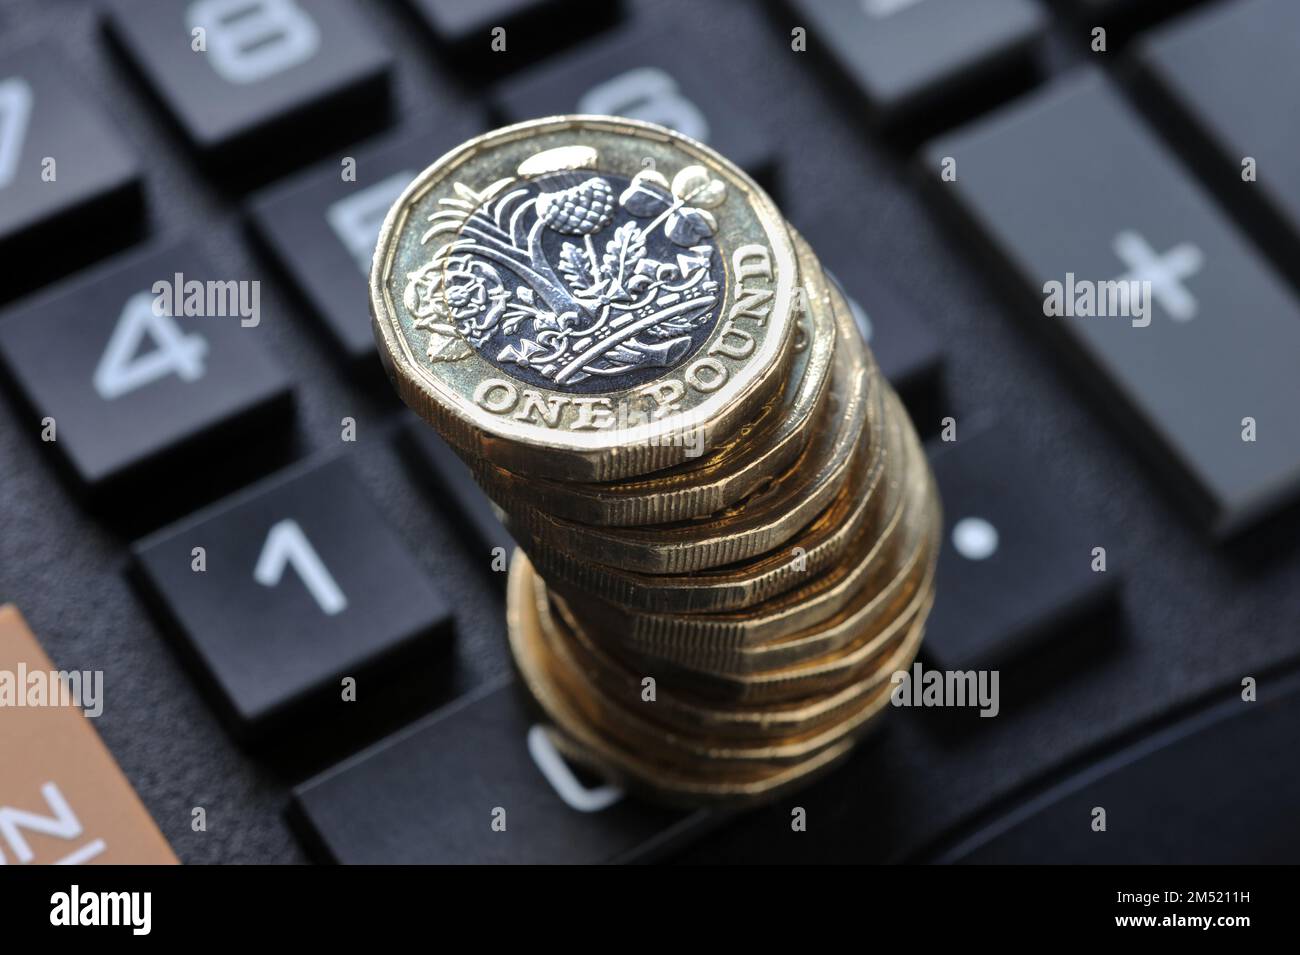 STACK OF ONE POUND COINS ON CALCULATOR RE COST OF LIVING CRISIS PENSIONS INCOME INFLATION HOUSEHOLD BUDGETS ETC UK Stock Photo